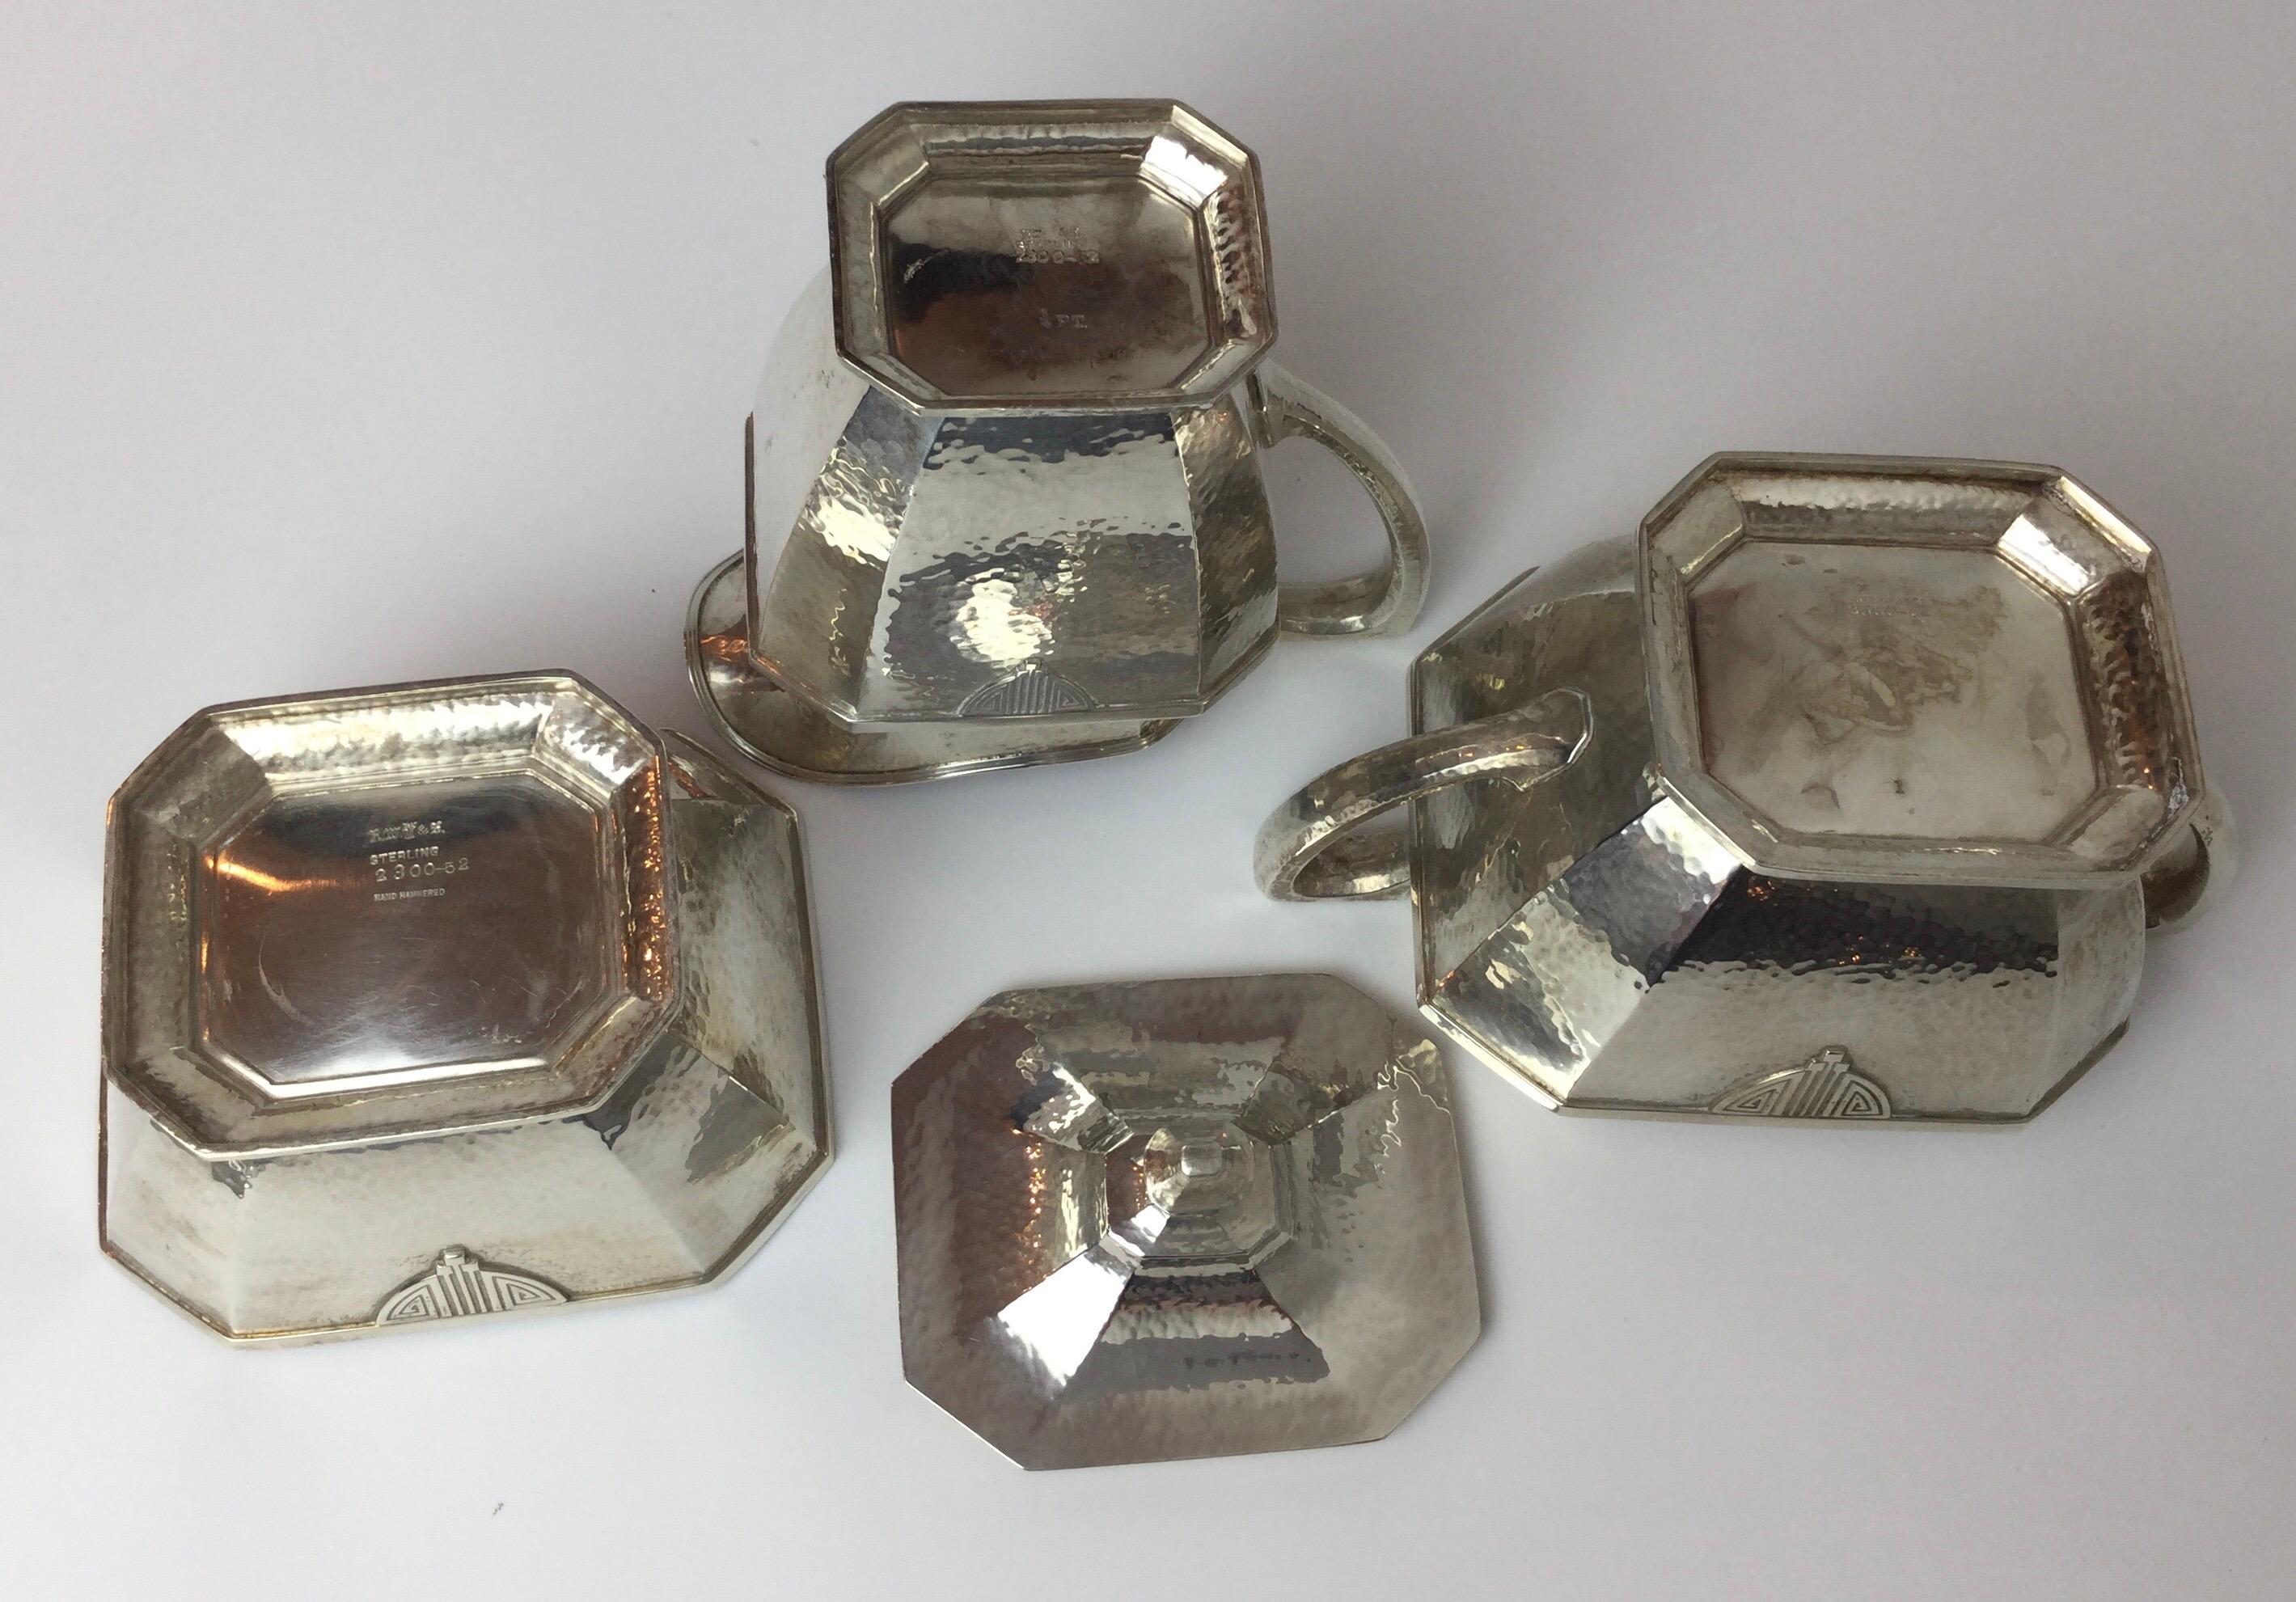 Hammered Sterling Silver 5-Piece Tea Set by Wallace, circa 1905